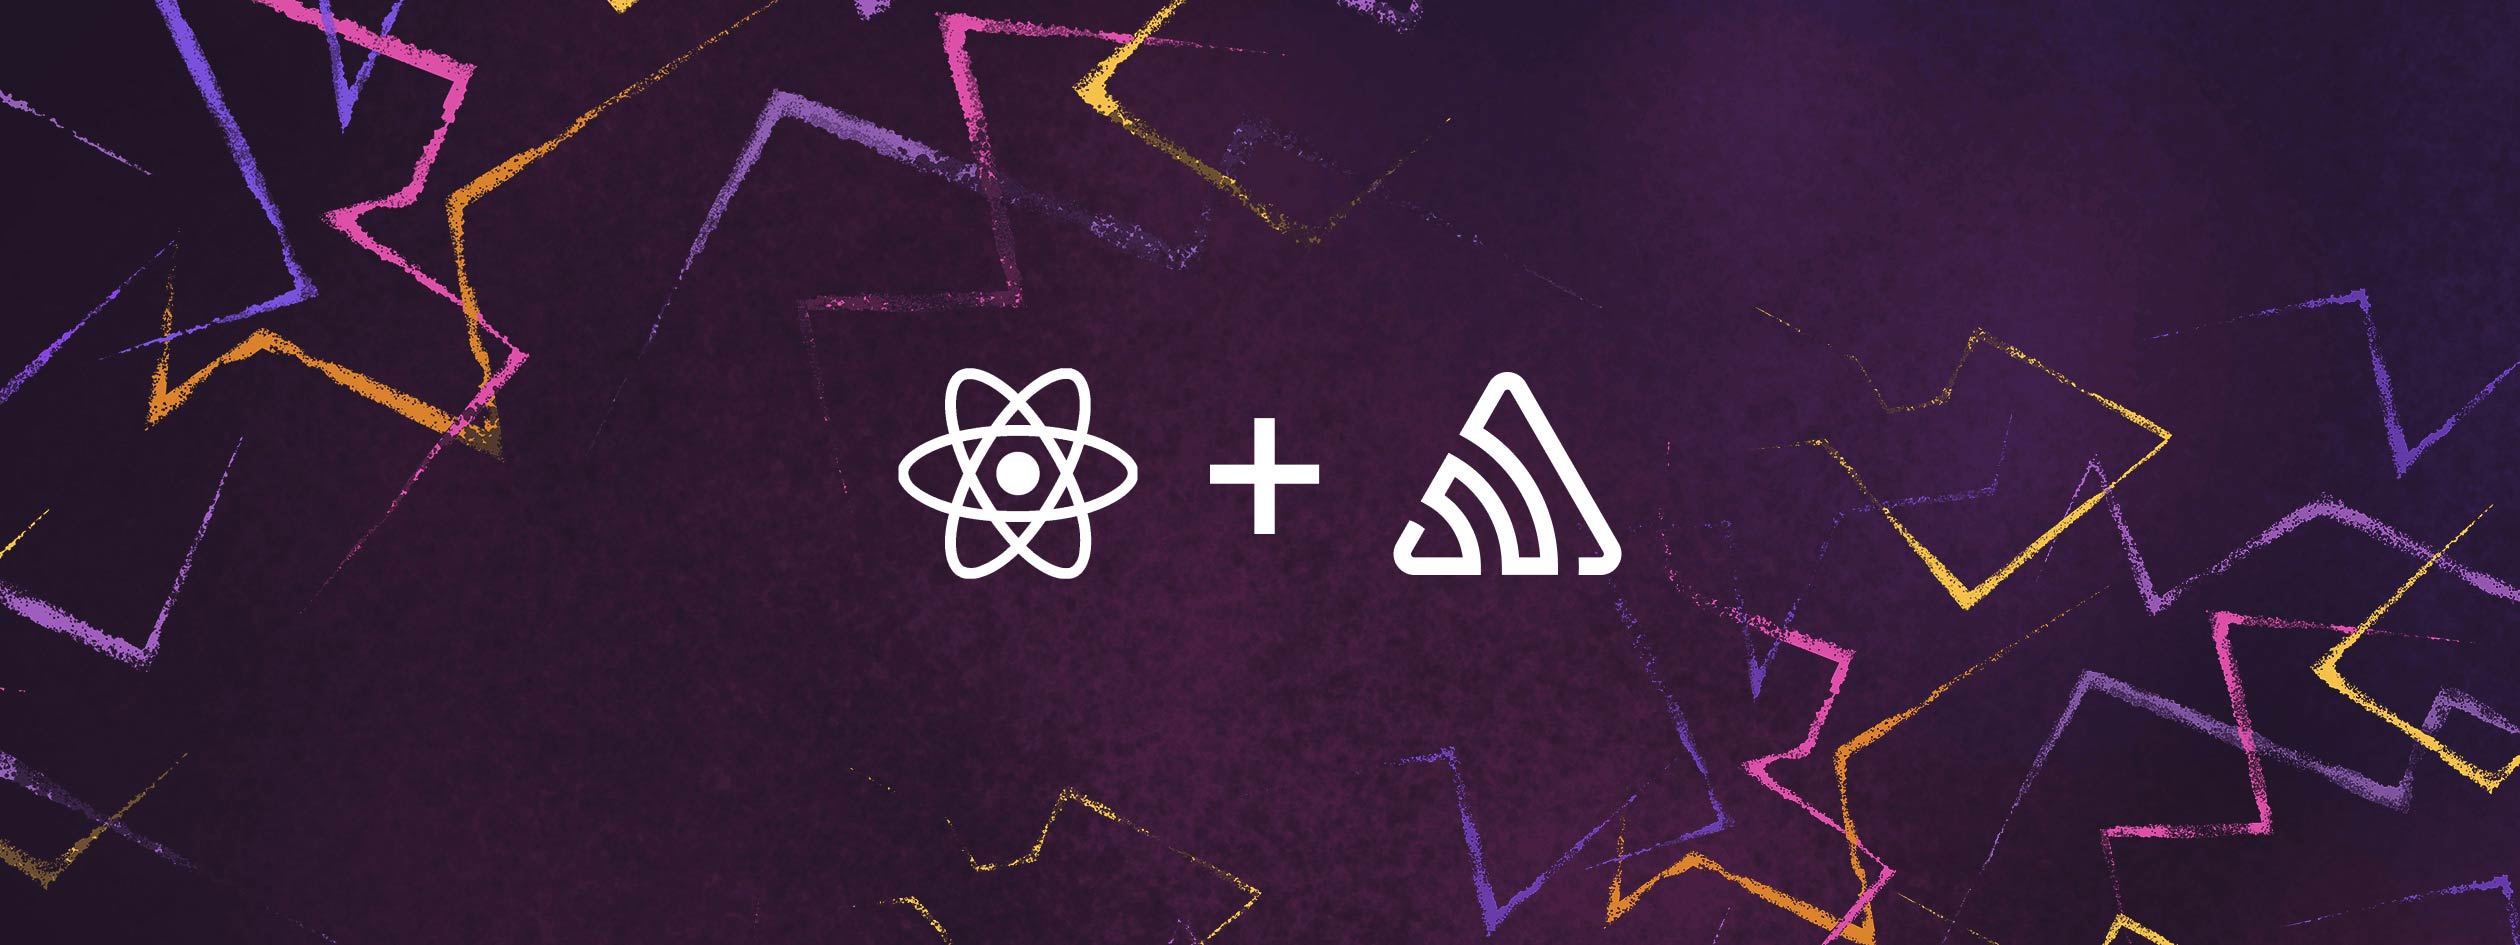 Adding Shimmer Effects to React Native apps